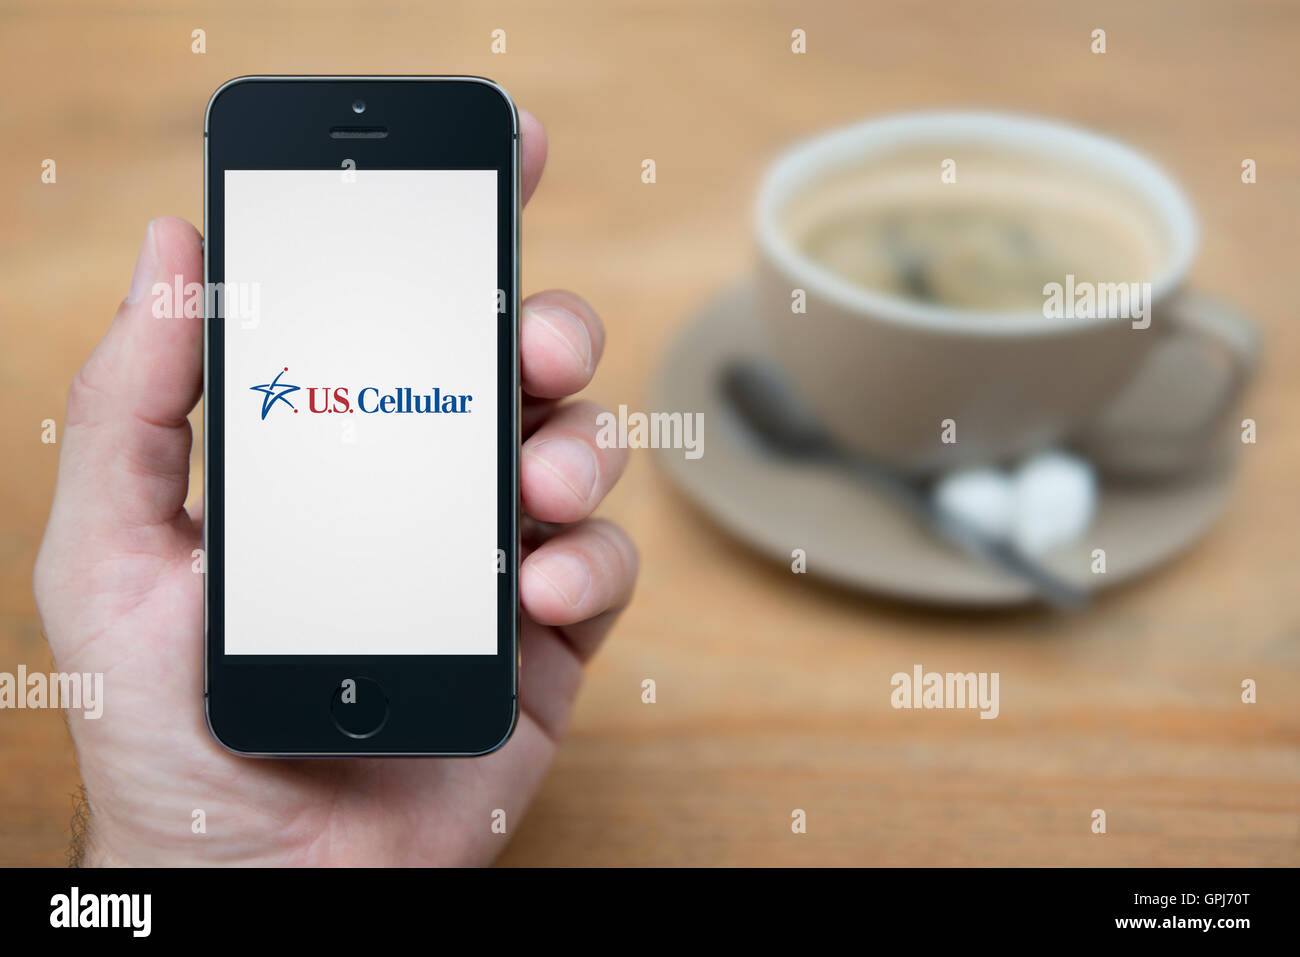 A man looks at his iPhone which displays the U.S.Cellular telecommunications operator logo, with coffee (Editorial use only). Stock Photo